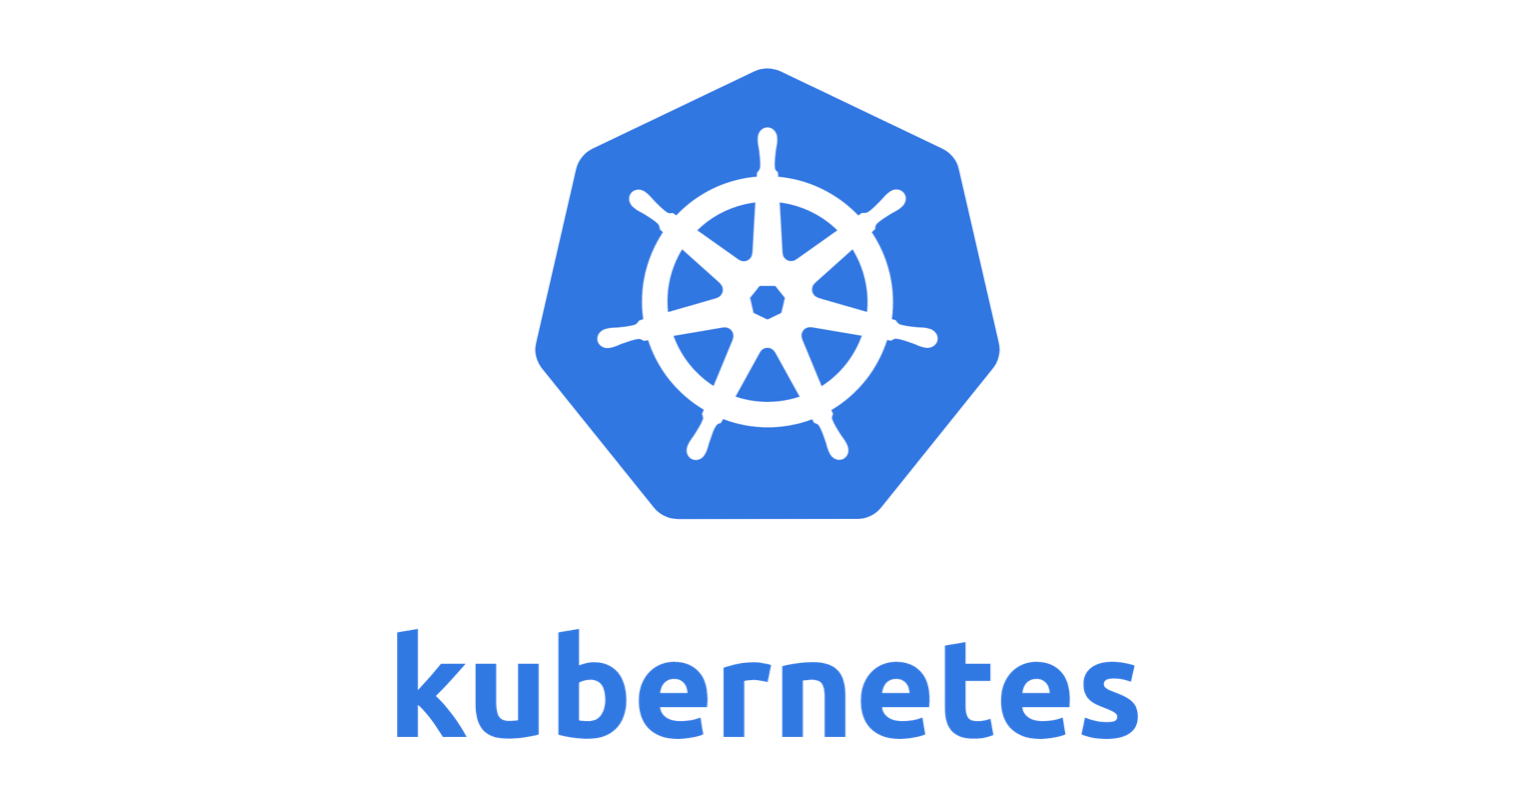 Kubernetes Scheduler: Everything You Need to Know